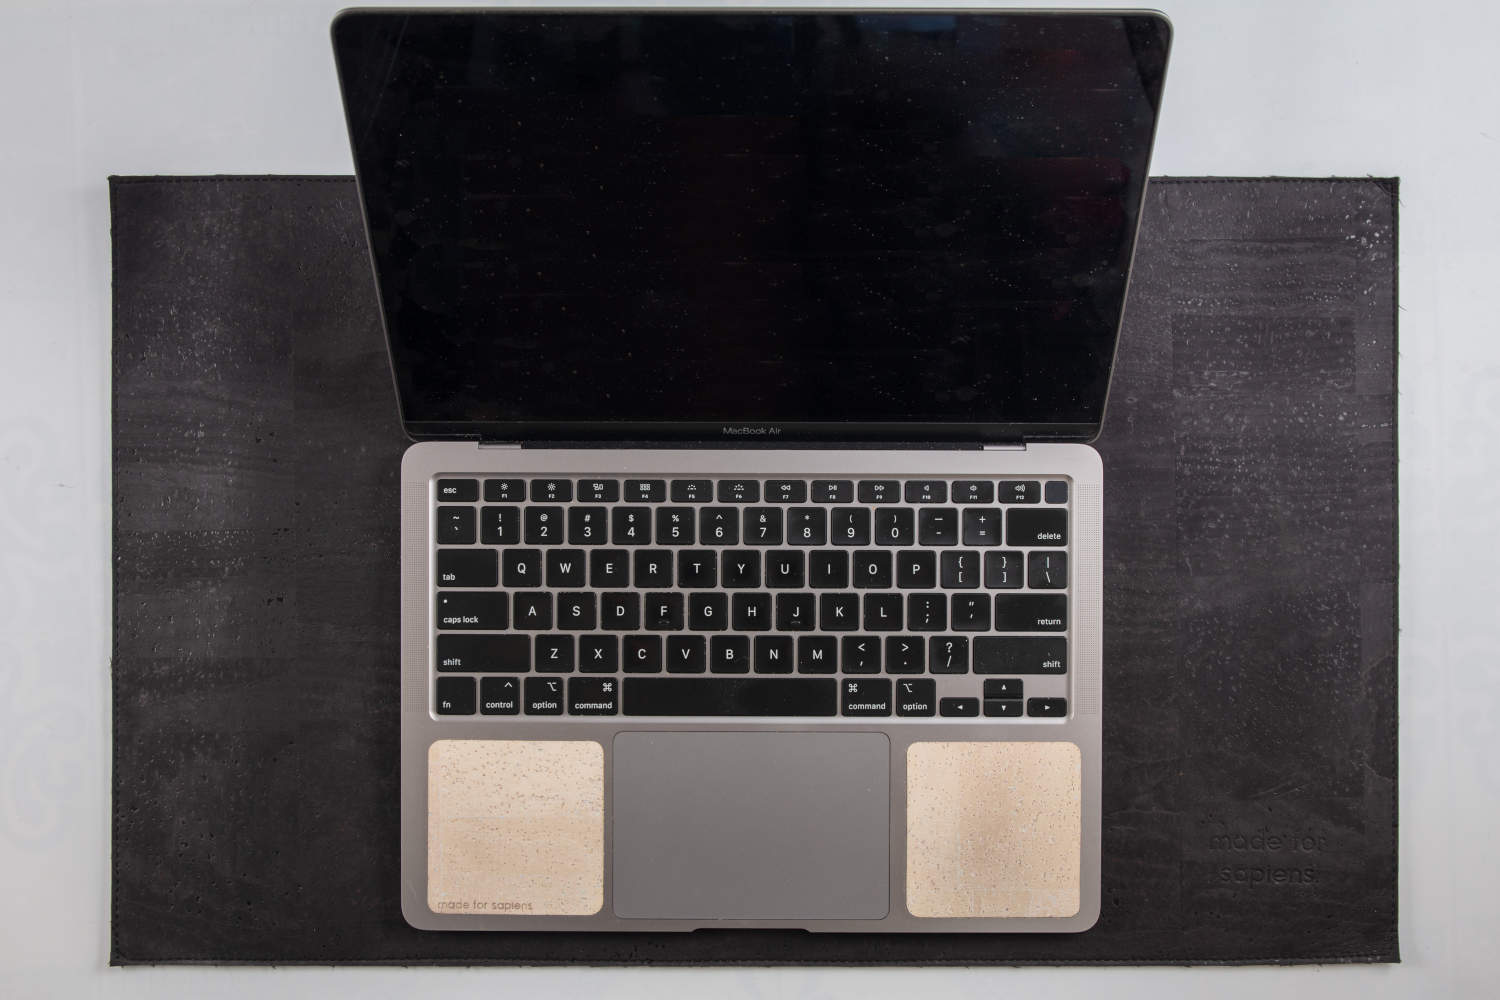 Overhead view of 13-inch Macbook on black cork leather laptop desk pad